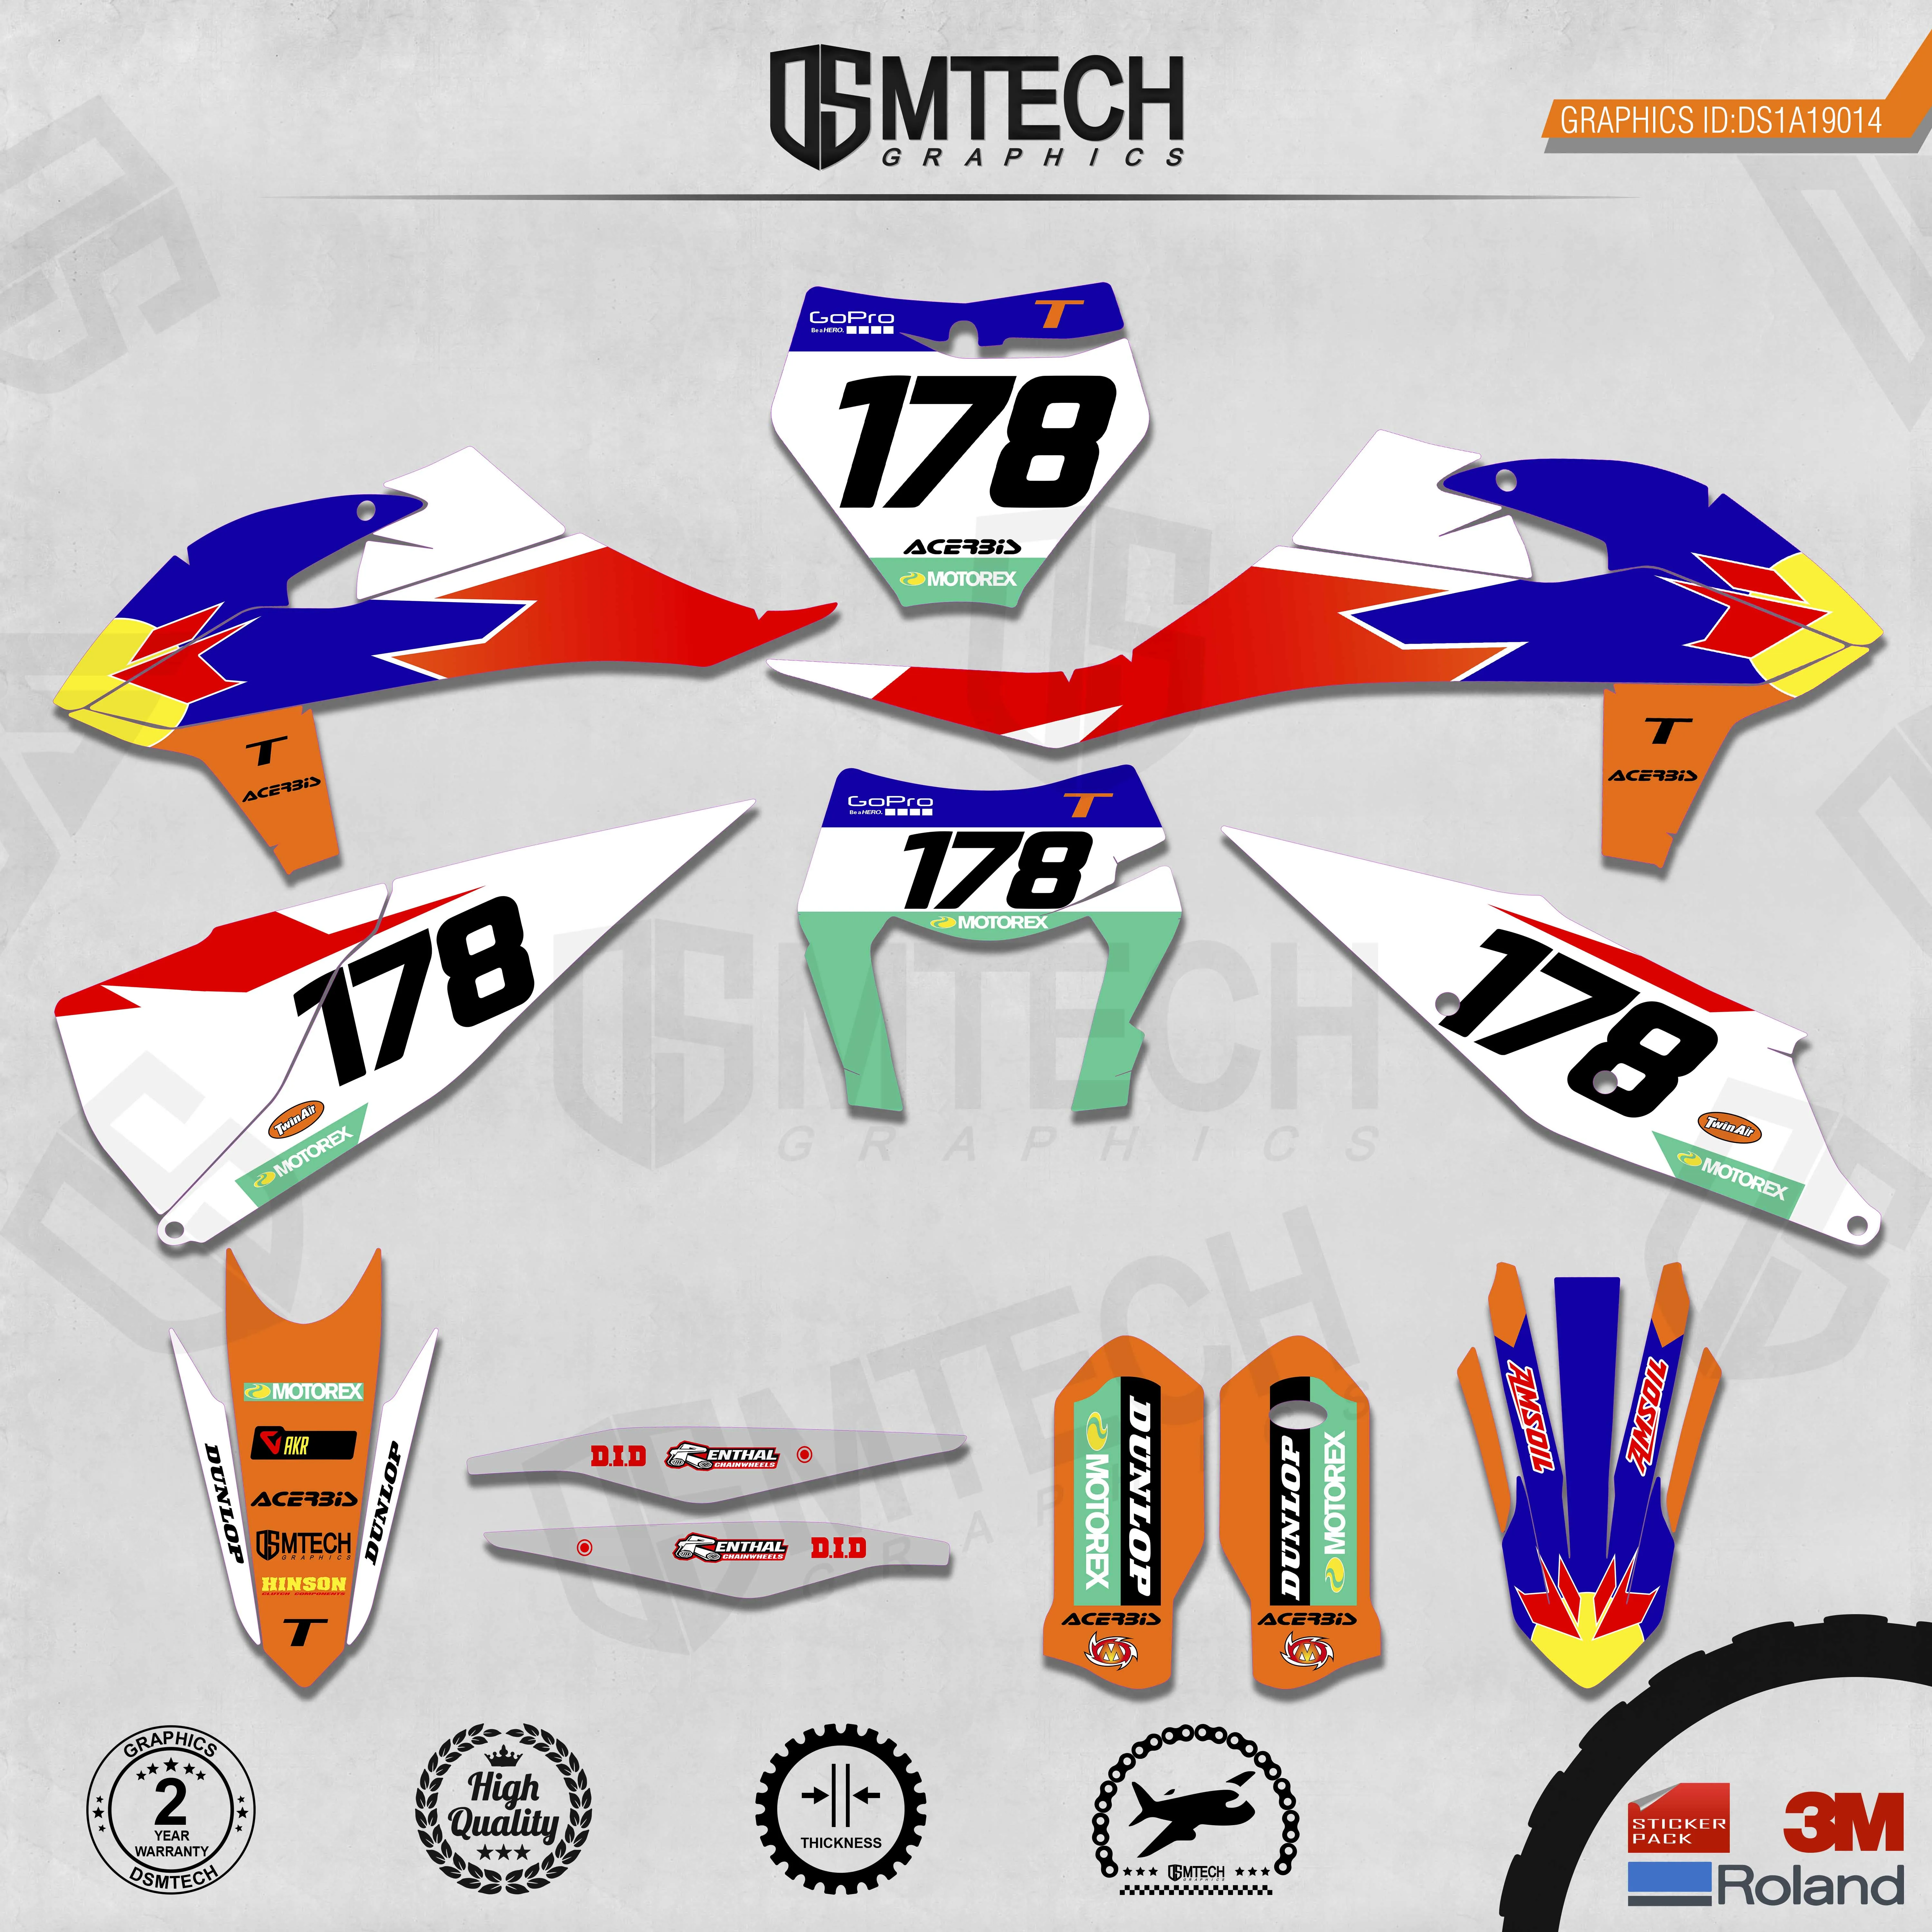 DSMTECH Customized Team Graphics Backgrounds Decals 3M Custom Stickers For 2019-2020 SXF 2020-2021EXC 014